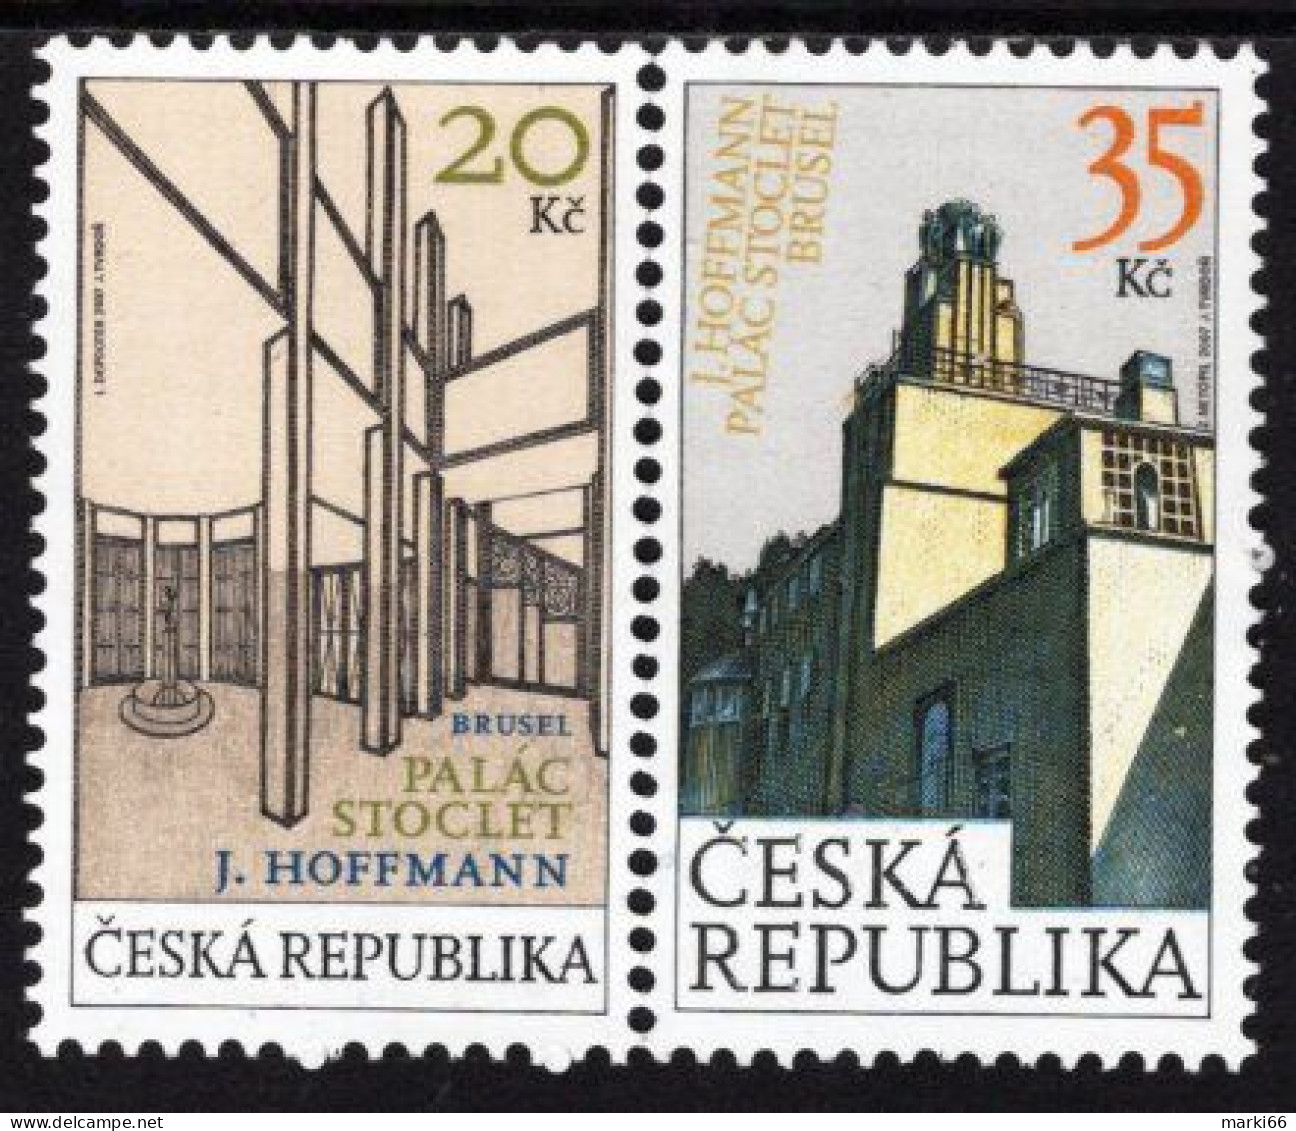 Czech Republic - 2007 - Architecture - Stoclet Palace - Joint Issue With Belgium - Mint Stamp Set - Neufs